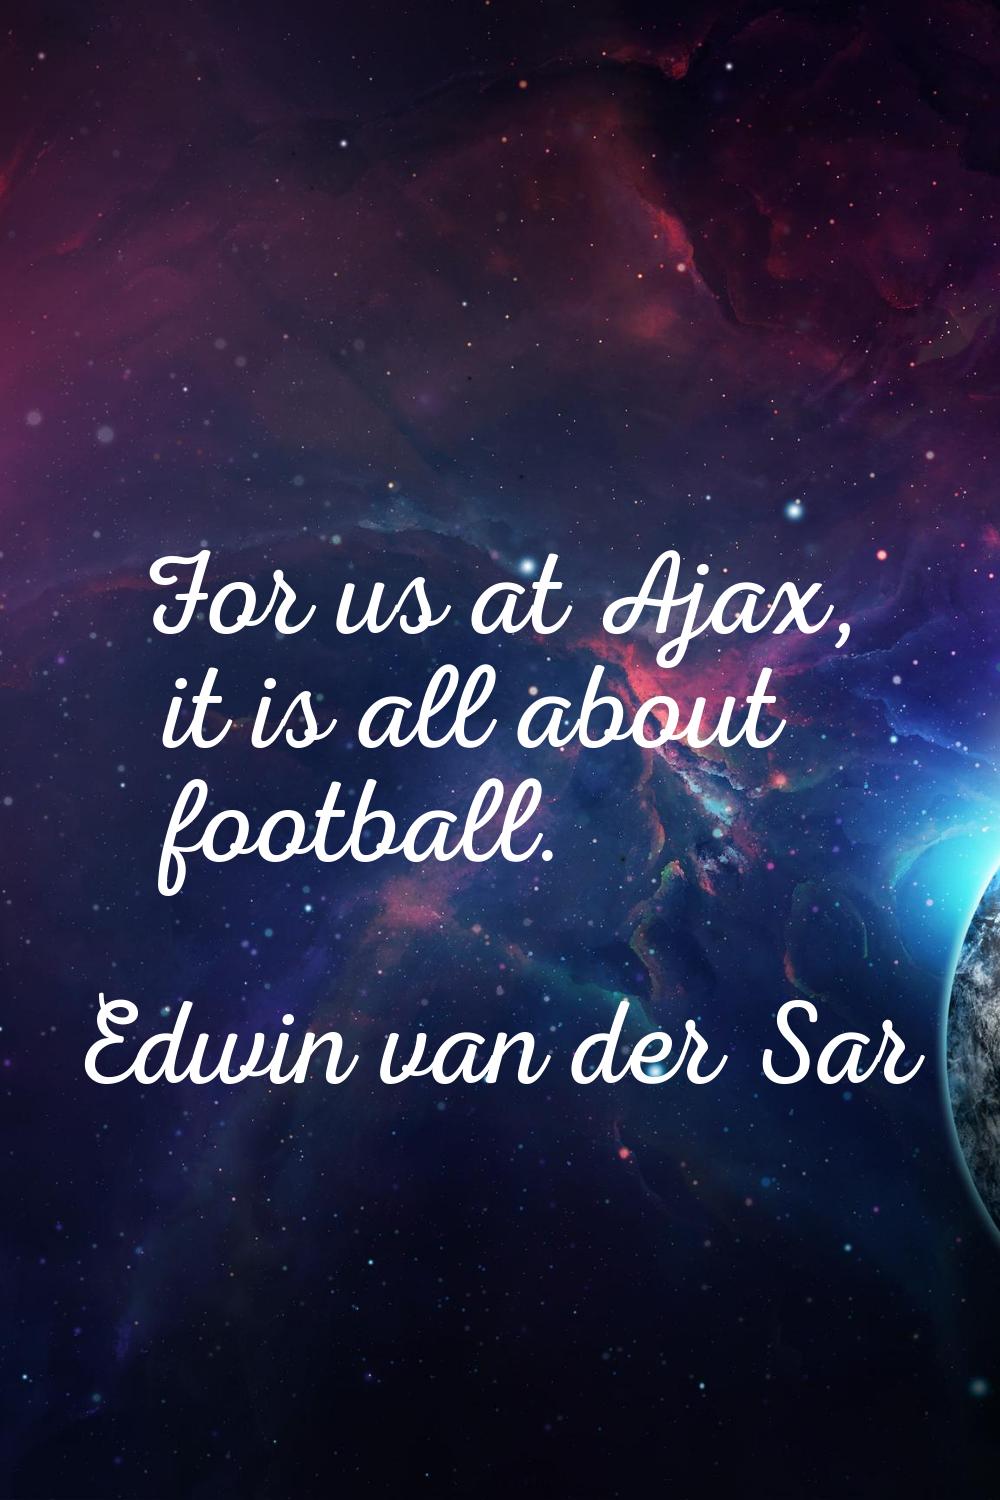 For us at Ajax, it is all about football.